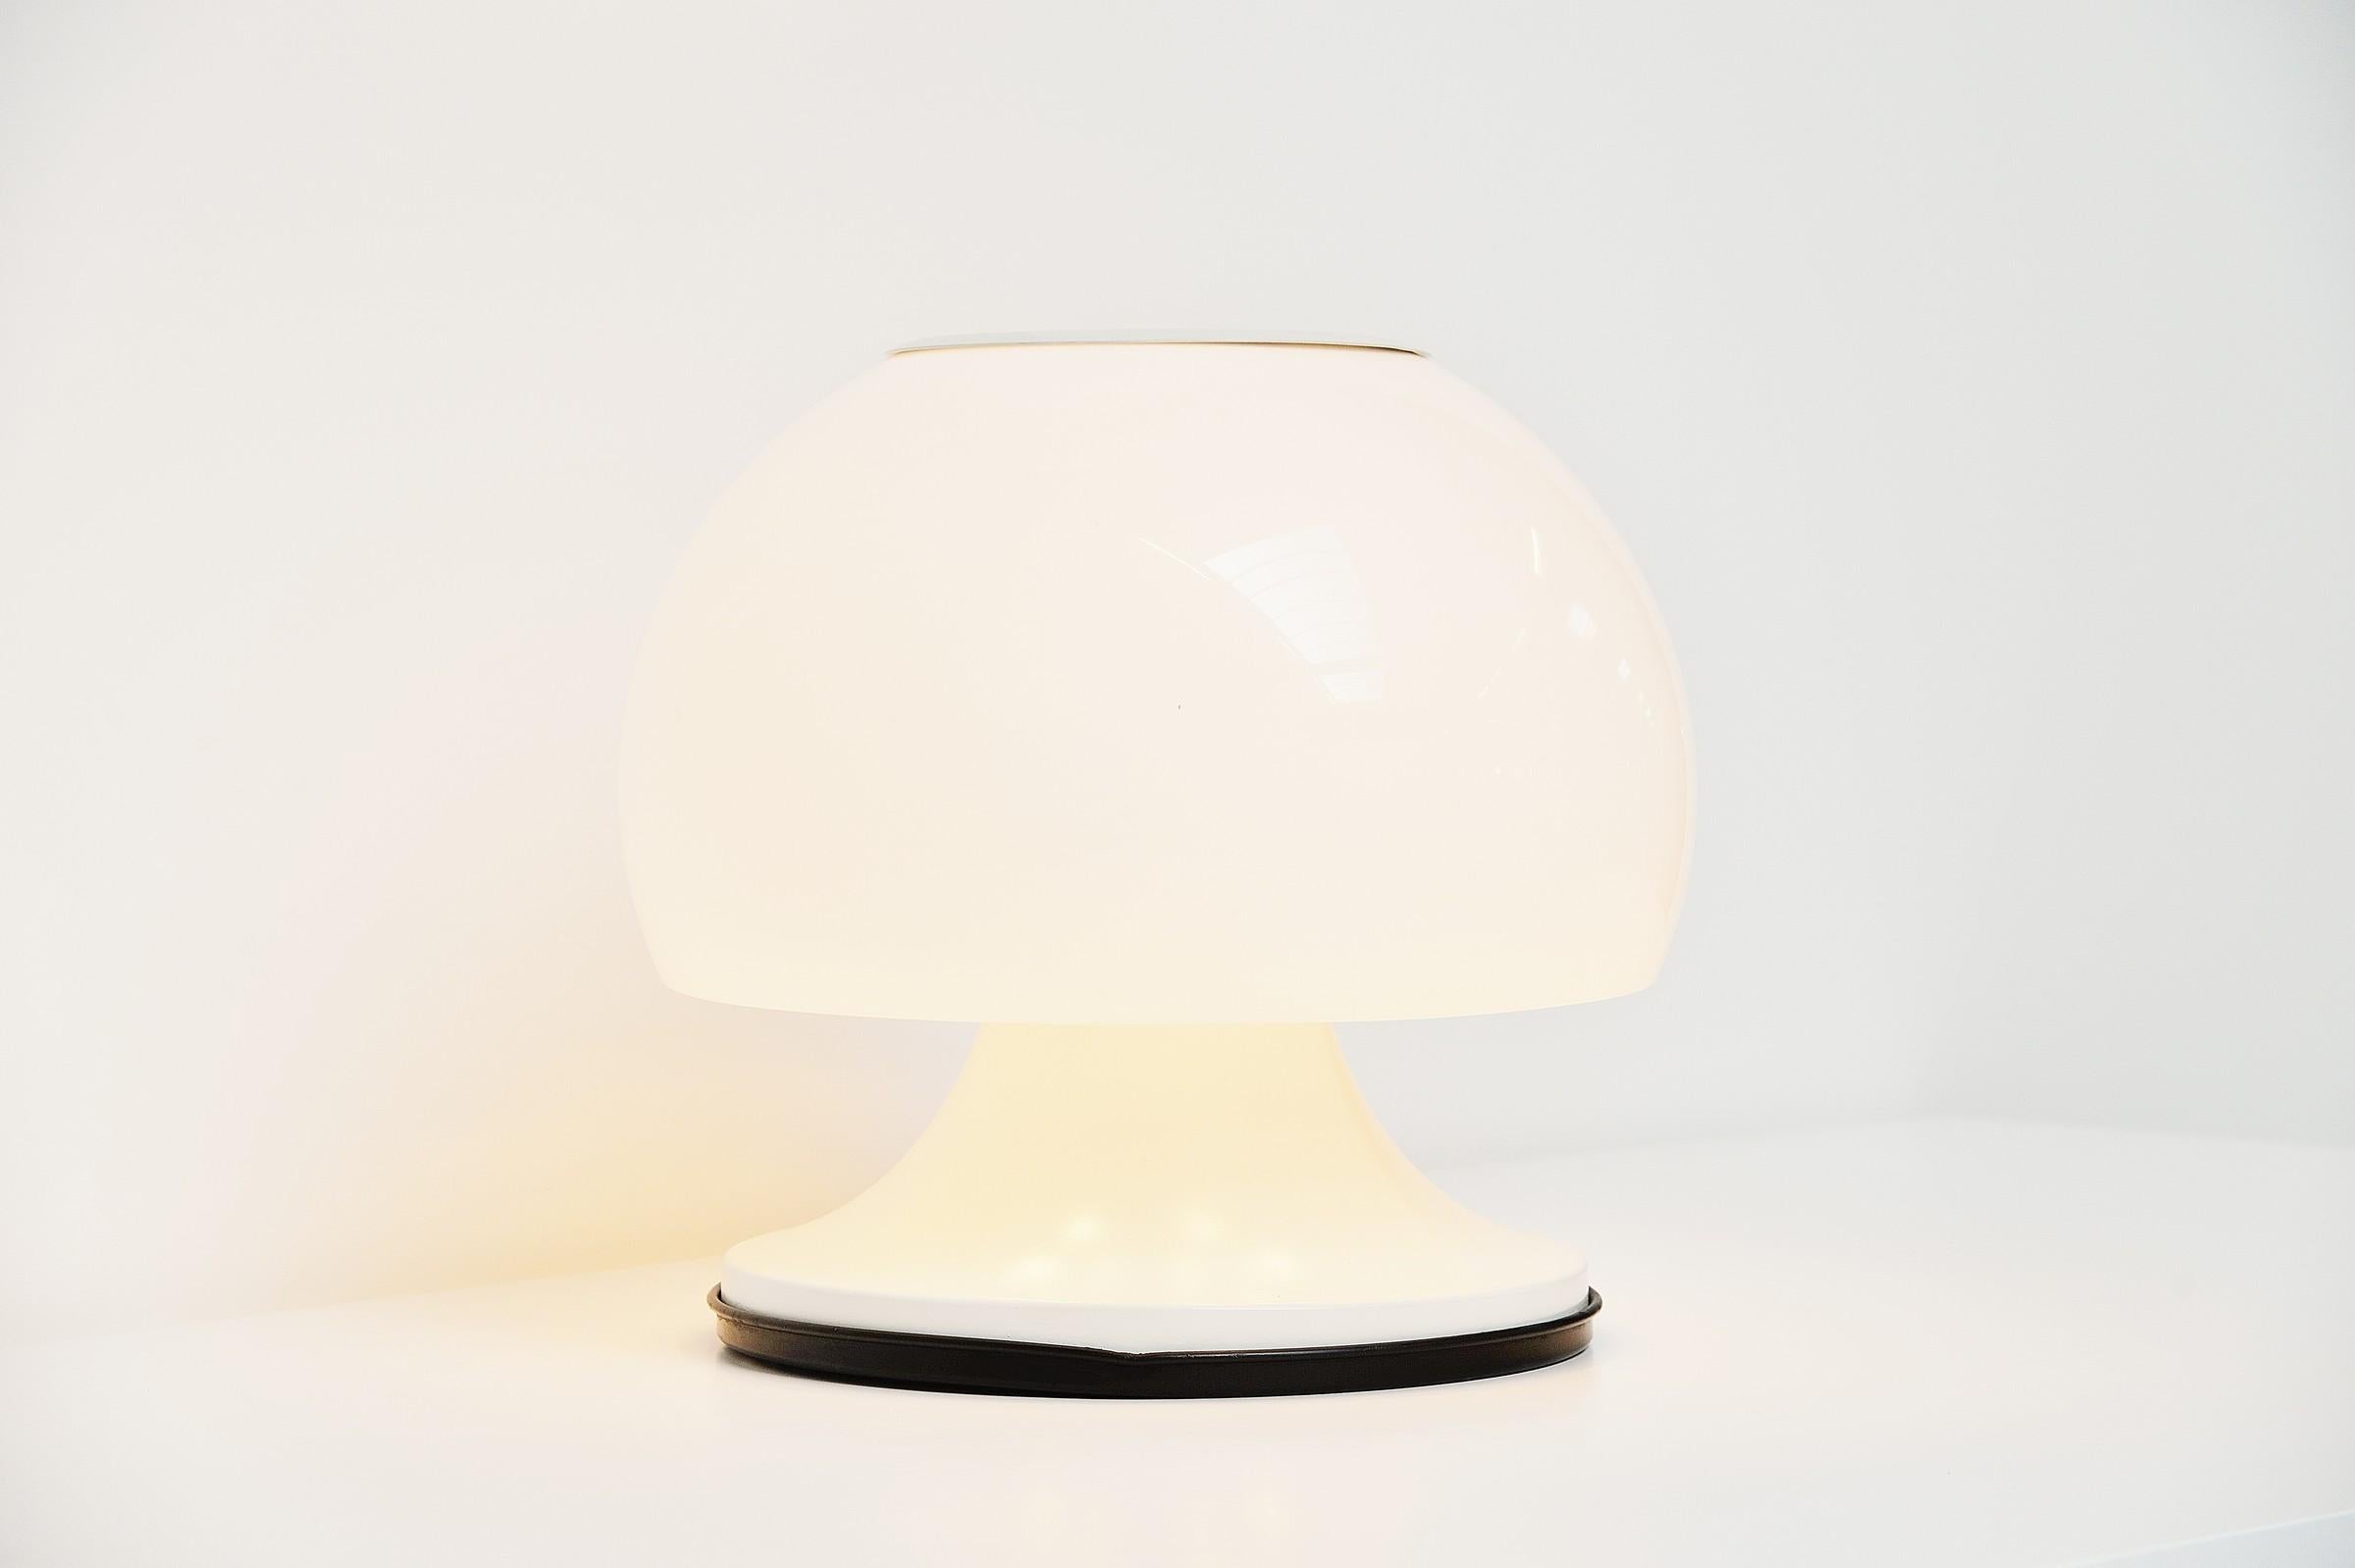 Large sized table lamp model 596 designed by Gino Sarfatti and manufactured by Arteluce, Italy 1968. This large mushroom shaped table lamp has a diffuser cup in white opaline methacrylate. Aluminium base painted in white, refinished at some point